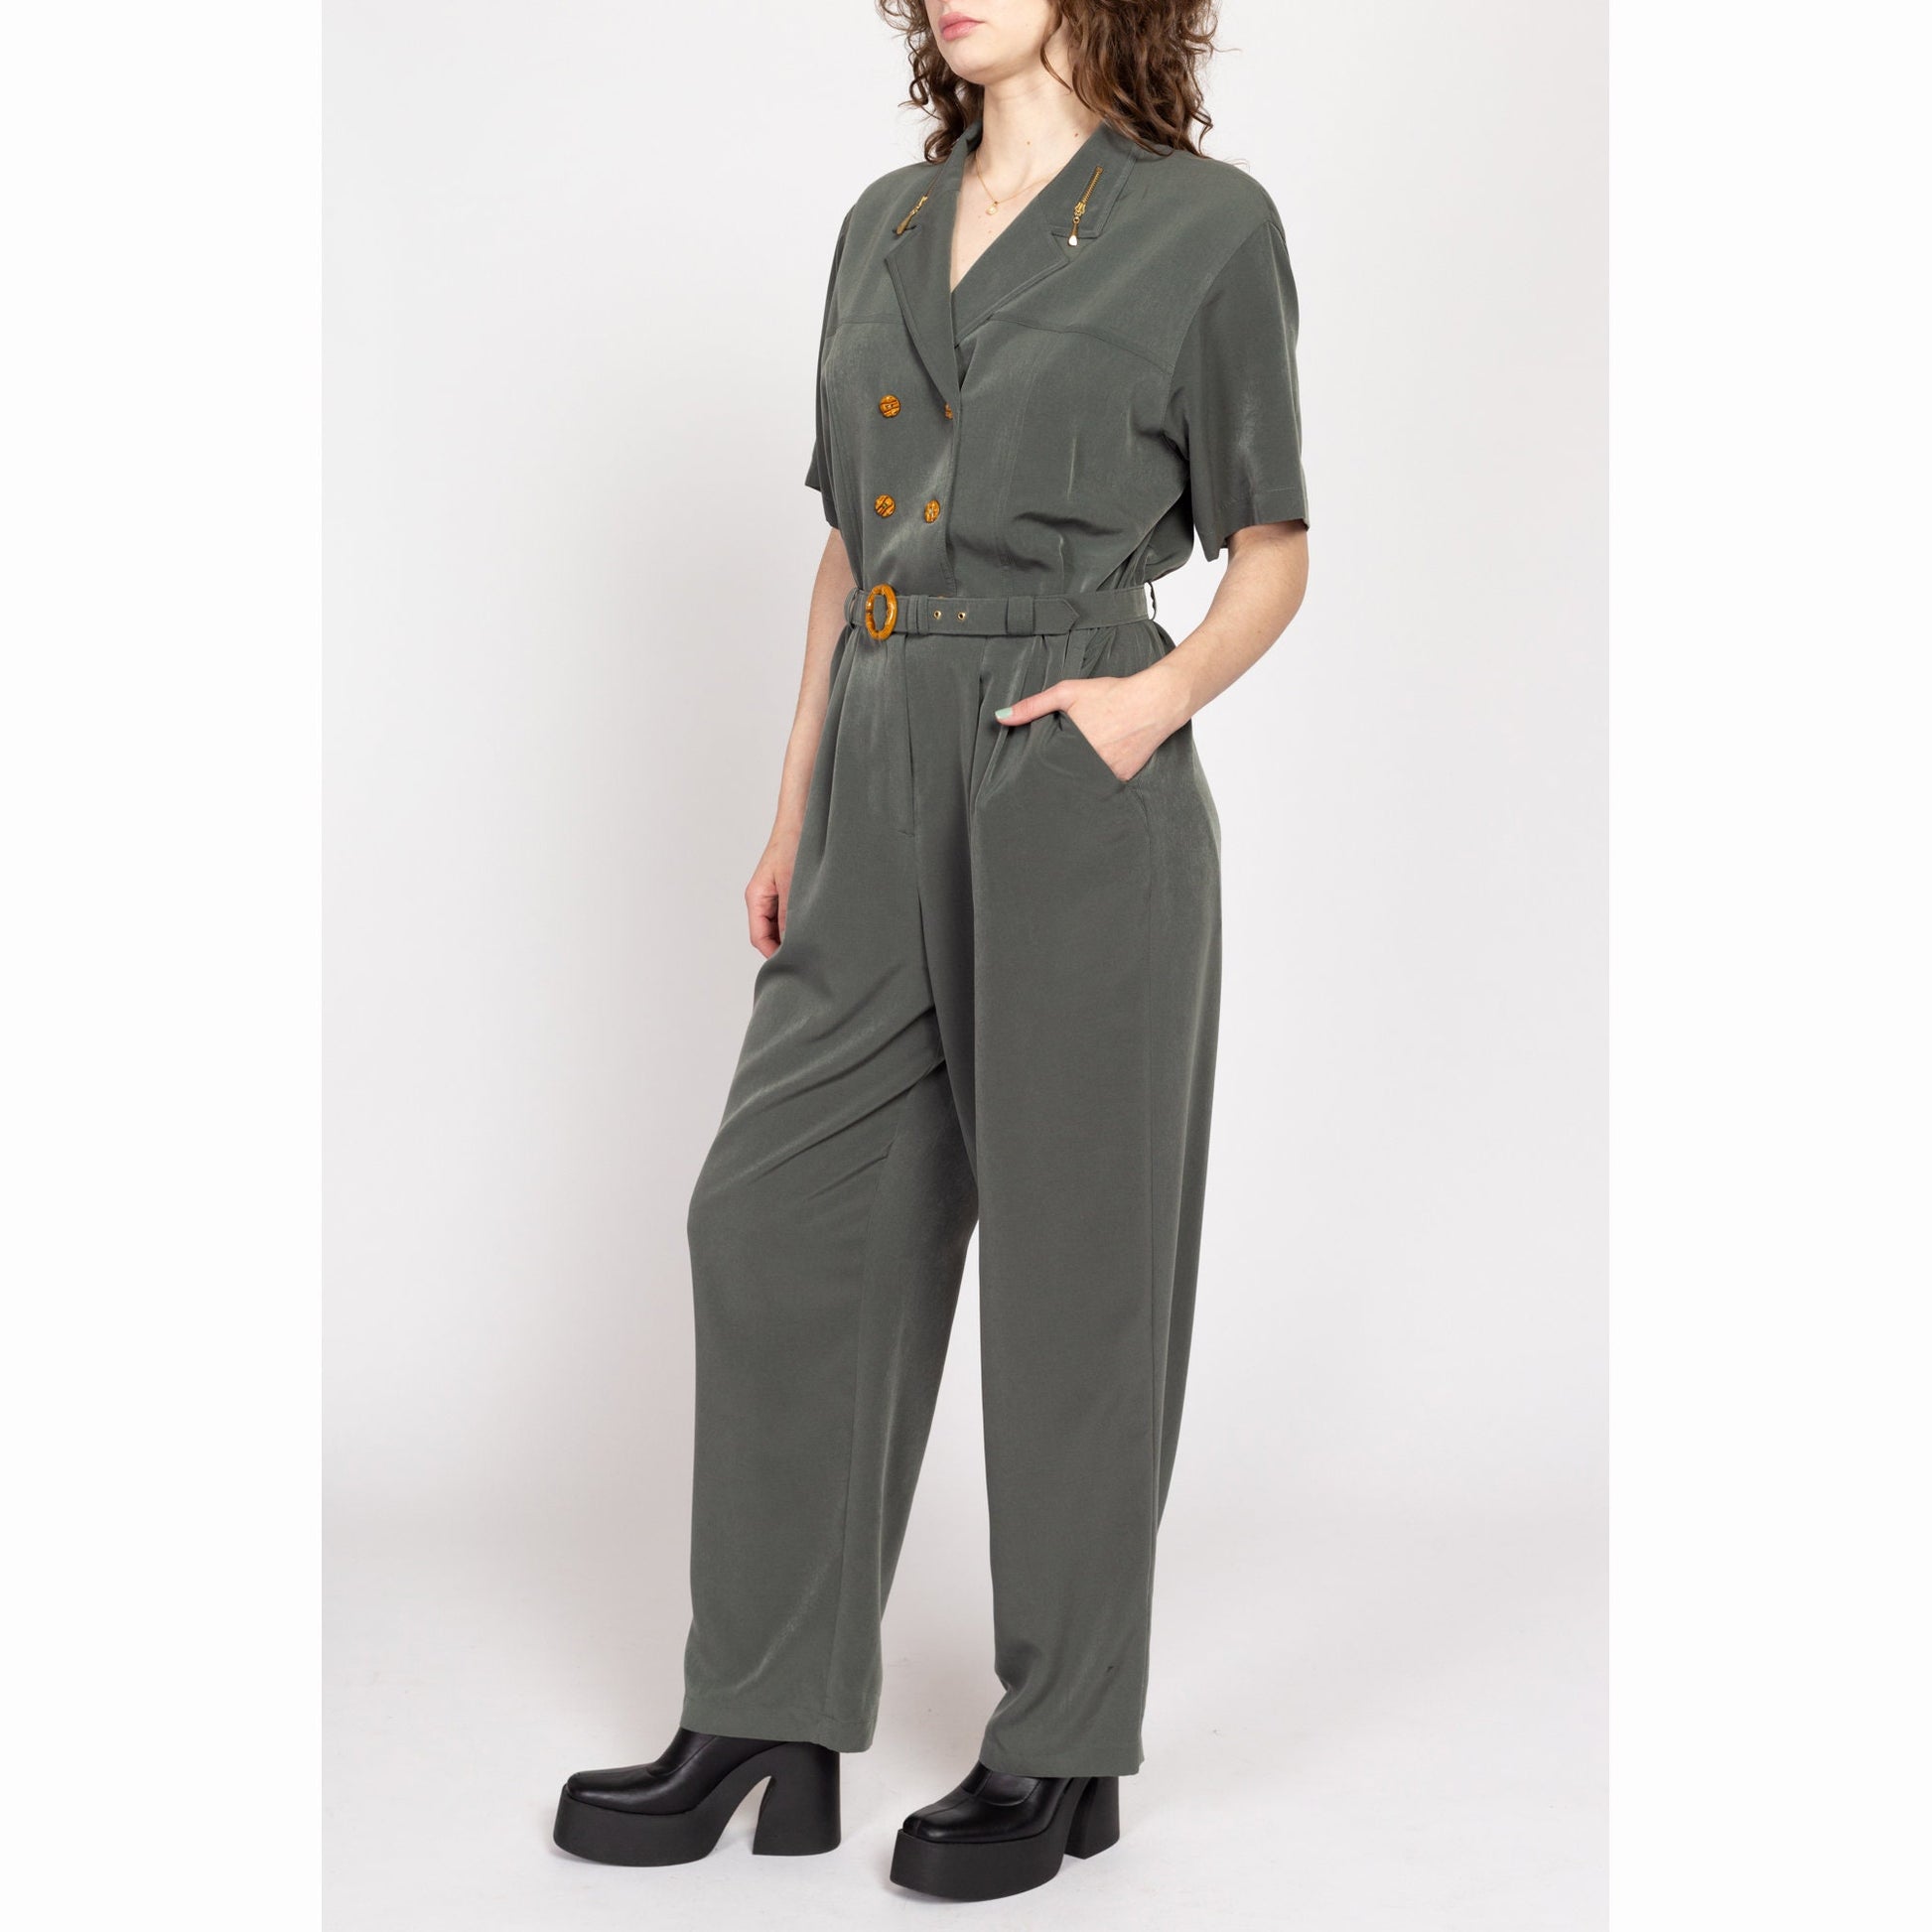 Large 90s Olive Green Double Breasted Jumpsuit | Vintage Belted Button Up Short Sleeve Collared Pantsuit